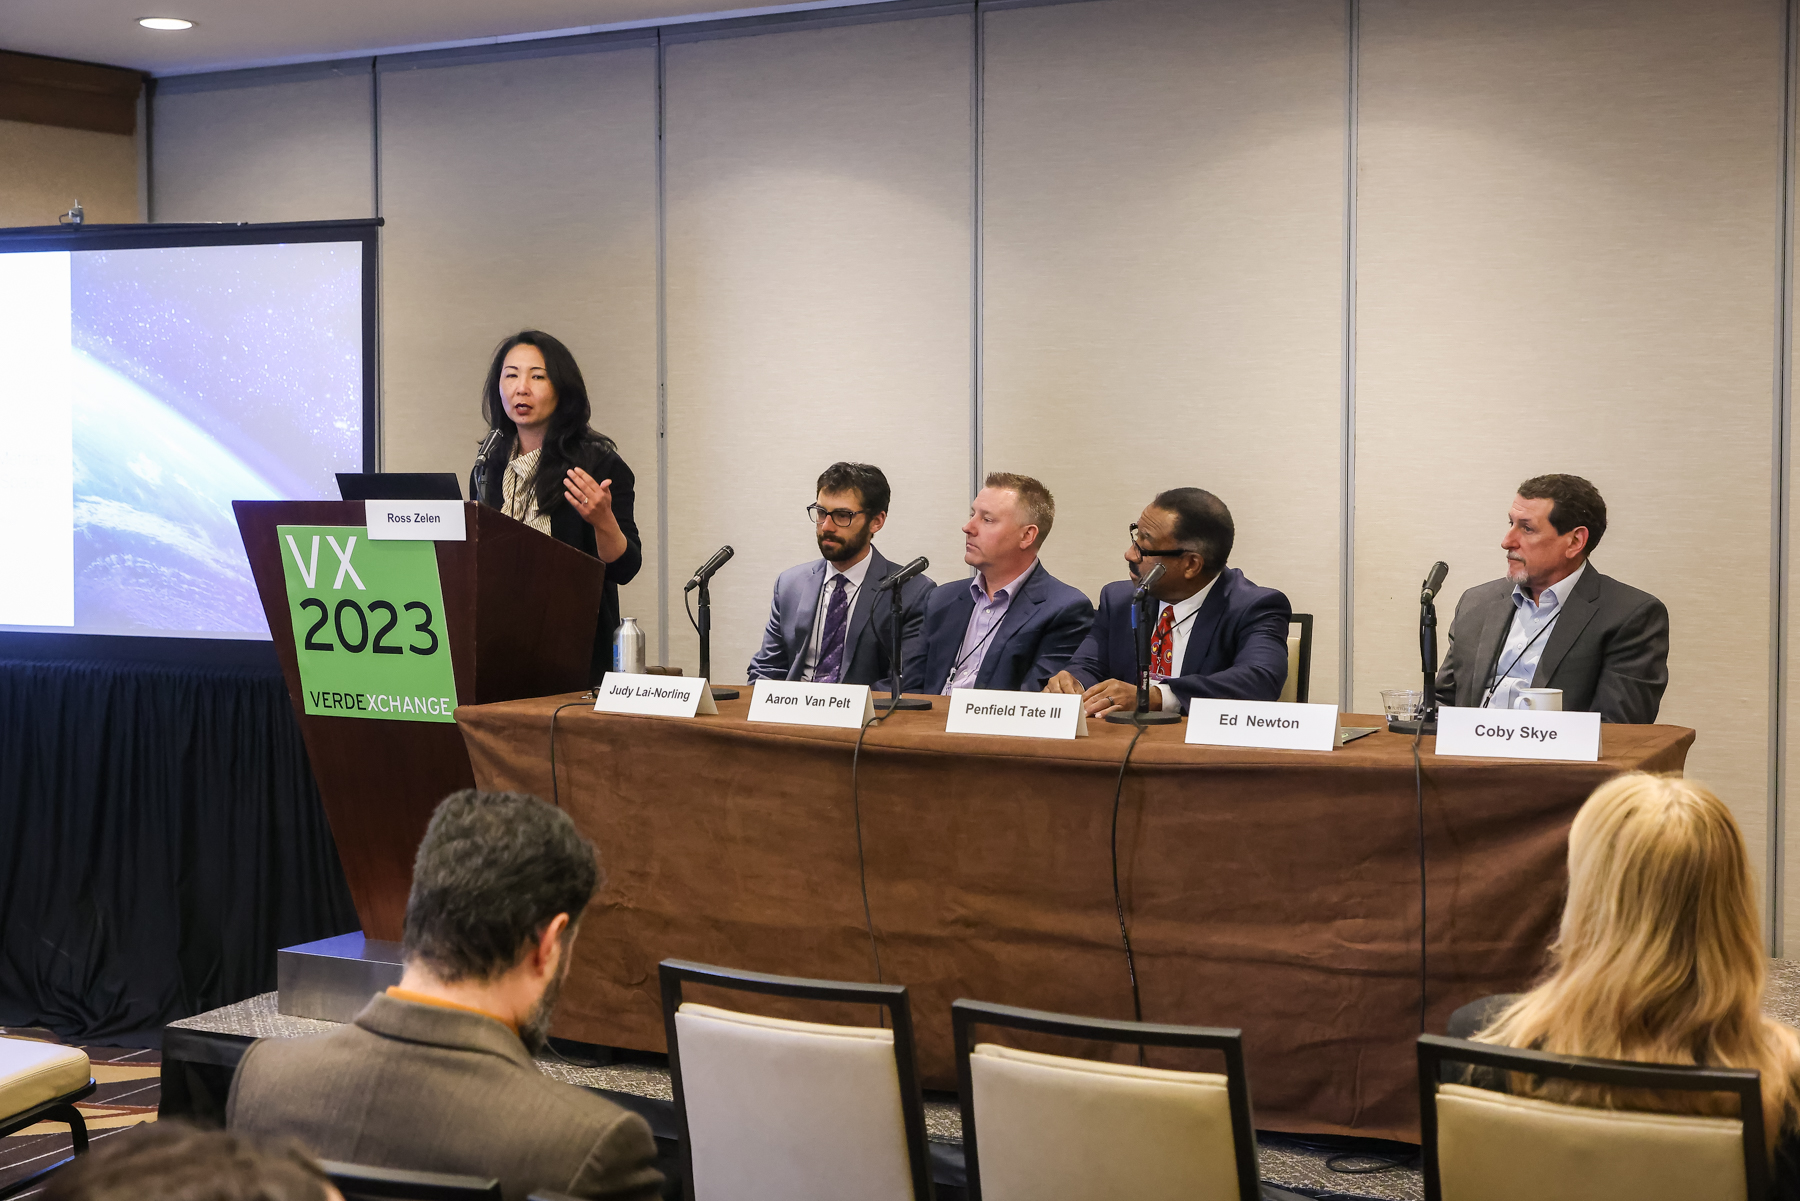 Carbon Mapper's Judy Lai Norling speaking in front of panel with CA Legislature's Ross Zelen, QLM's Aaron Van Pelt, Project Canary's Penfield Tate III, and SoCal Gas's Ed Newton